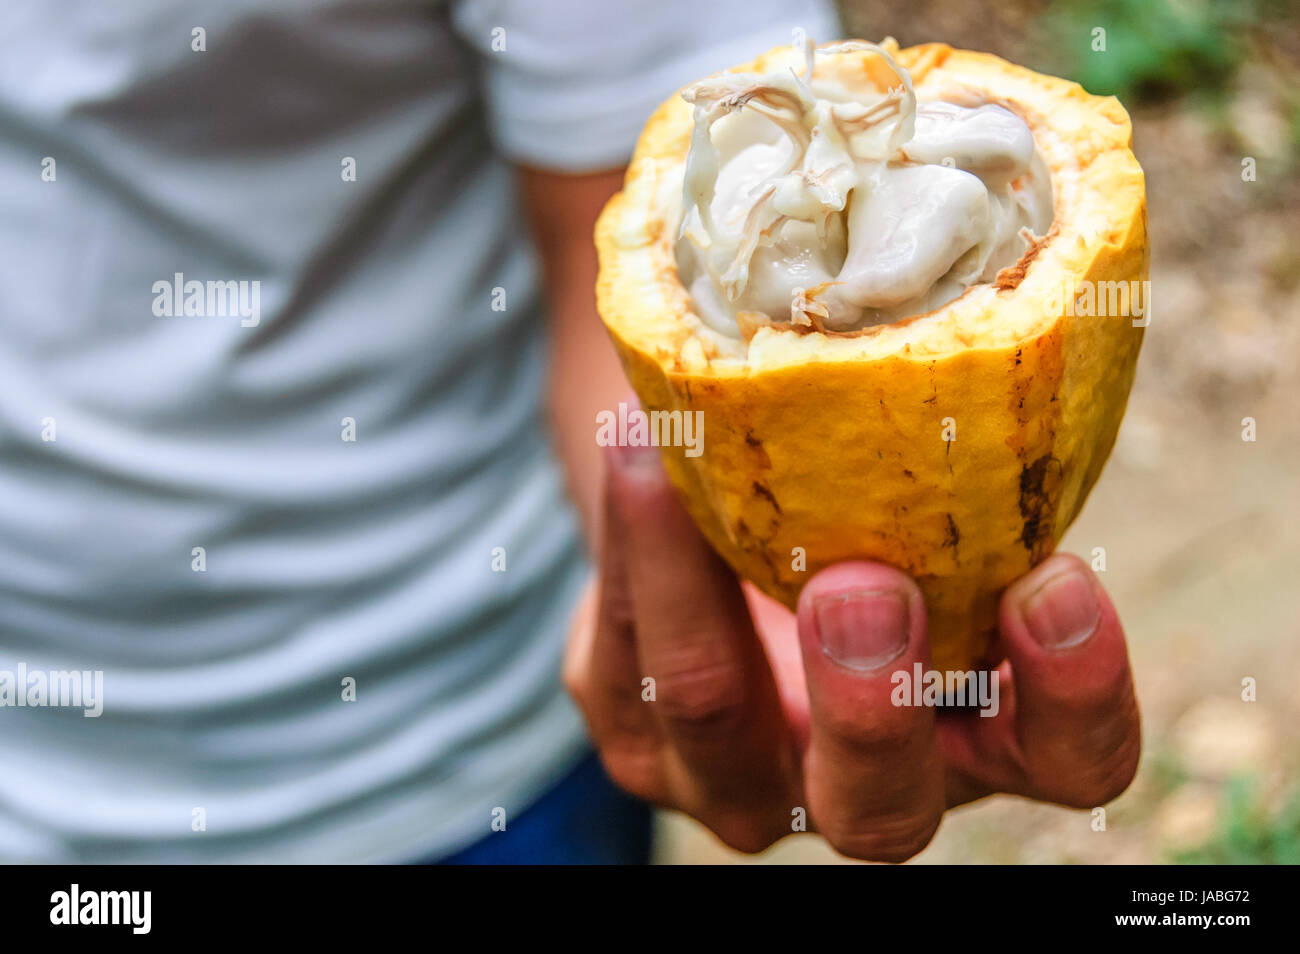 Cacao pod cut open to show cacao beans inside, Guatemala Stock Photo